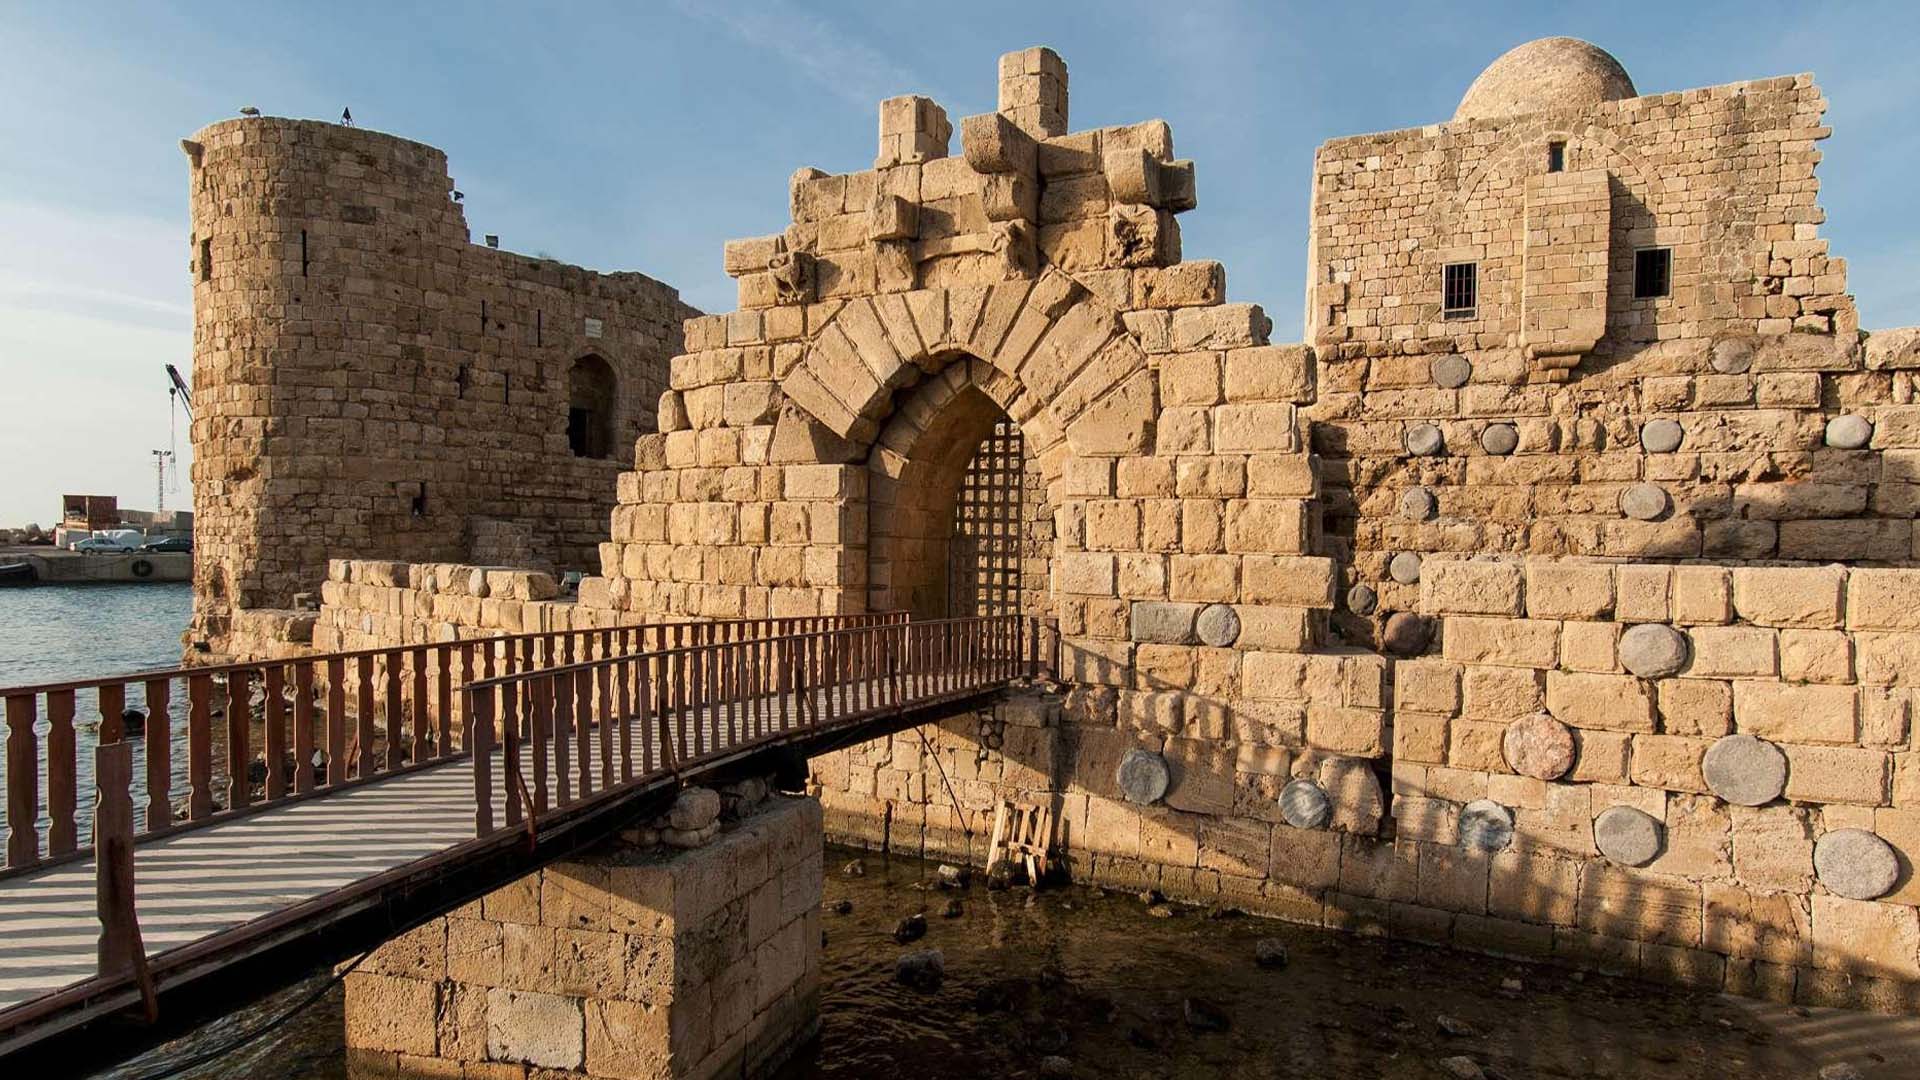 A photograph immortalizes the Sea Castle of Sidon, situated on a petite island amidst the vast expanse of the Mediterranean Sea, connected to the mainland by a slender causeway.